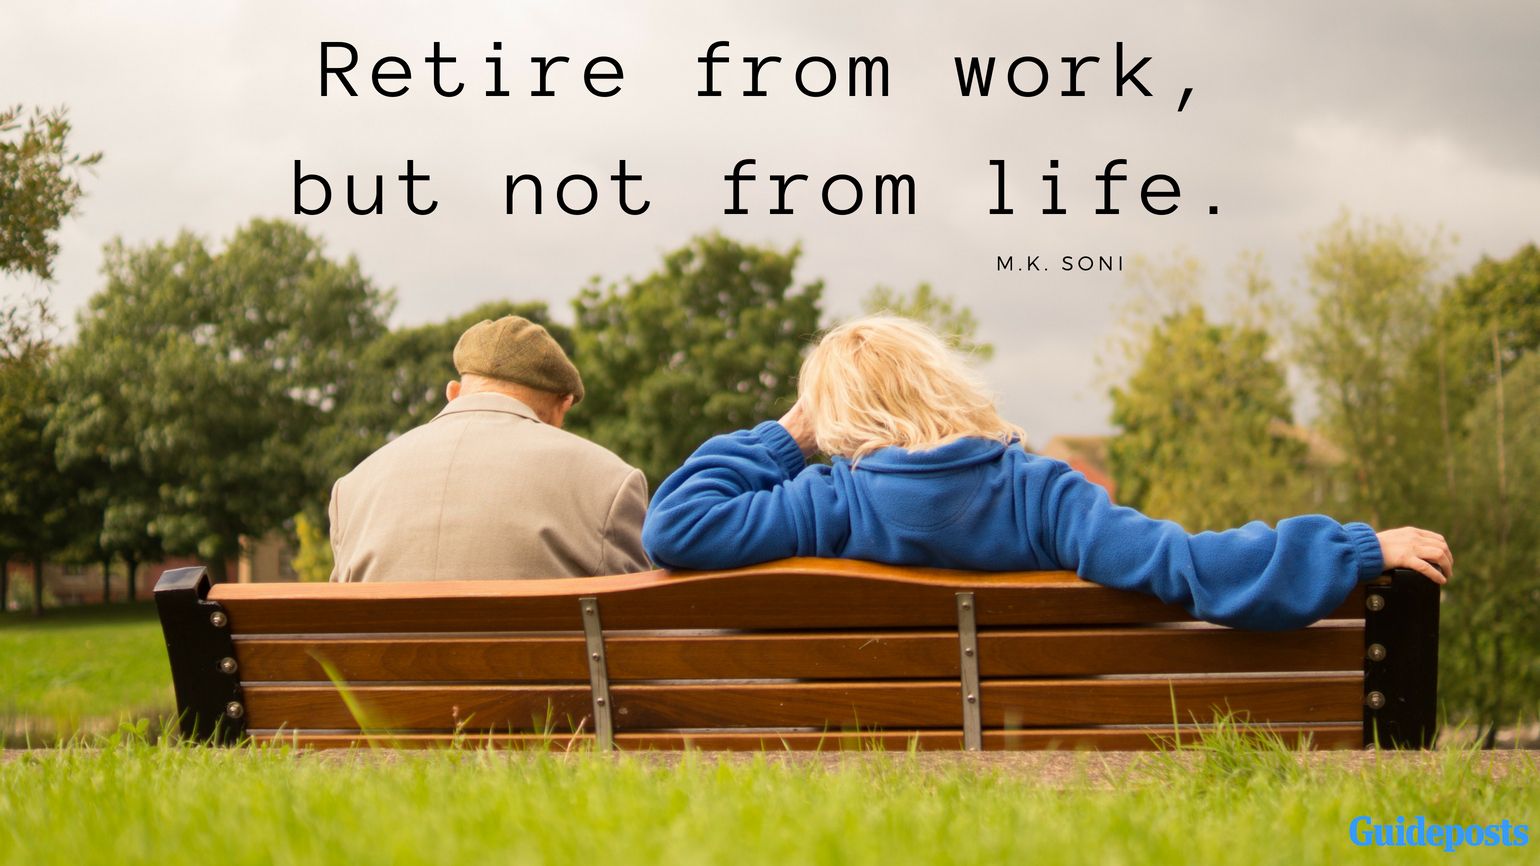 Inspirational Quotes for Retirement: “Retire from work, but not from life.” – M.K. Soni Better Living Life Advice